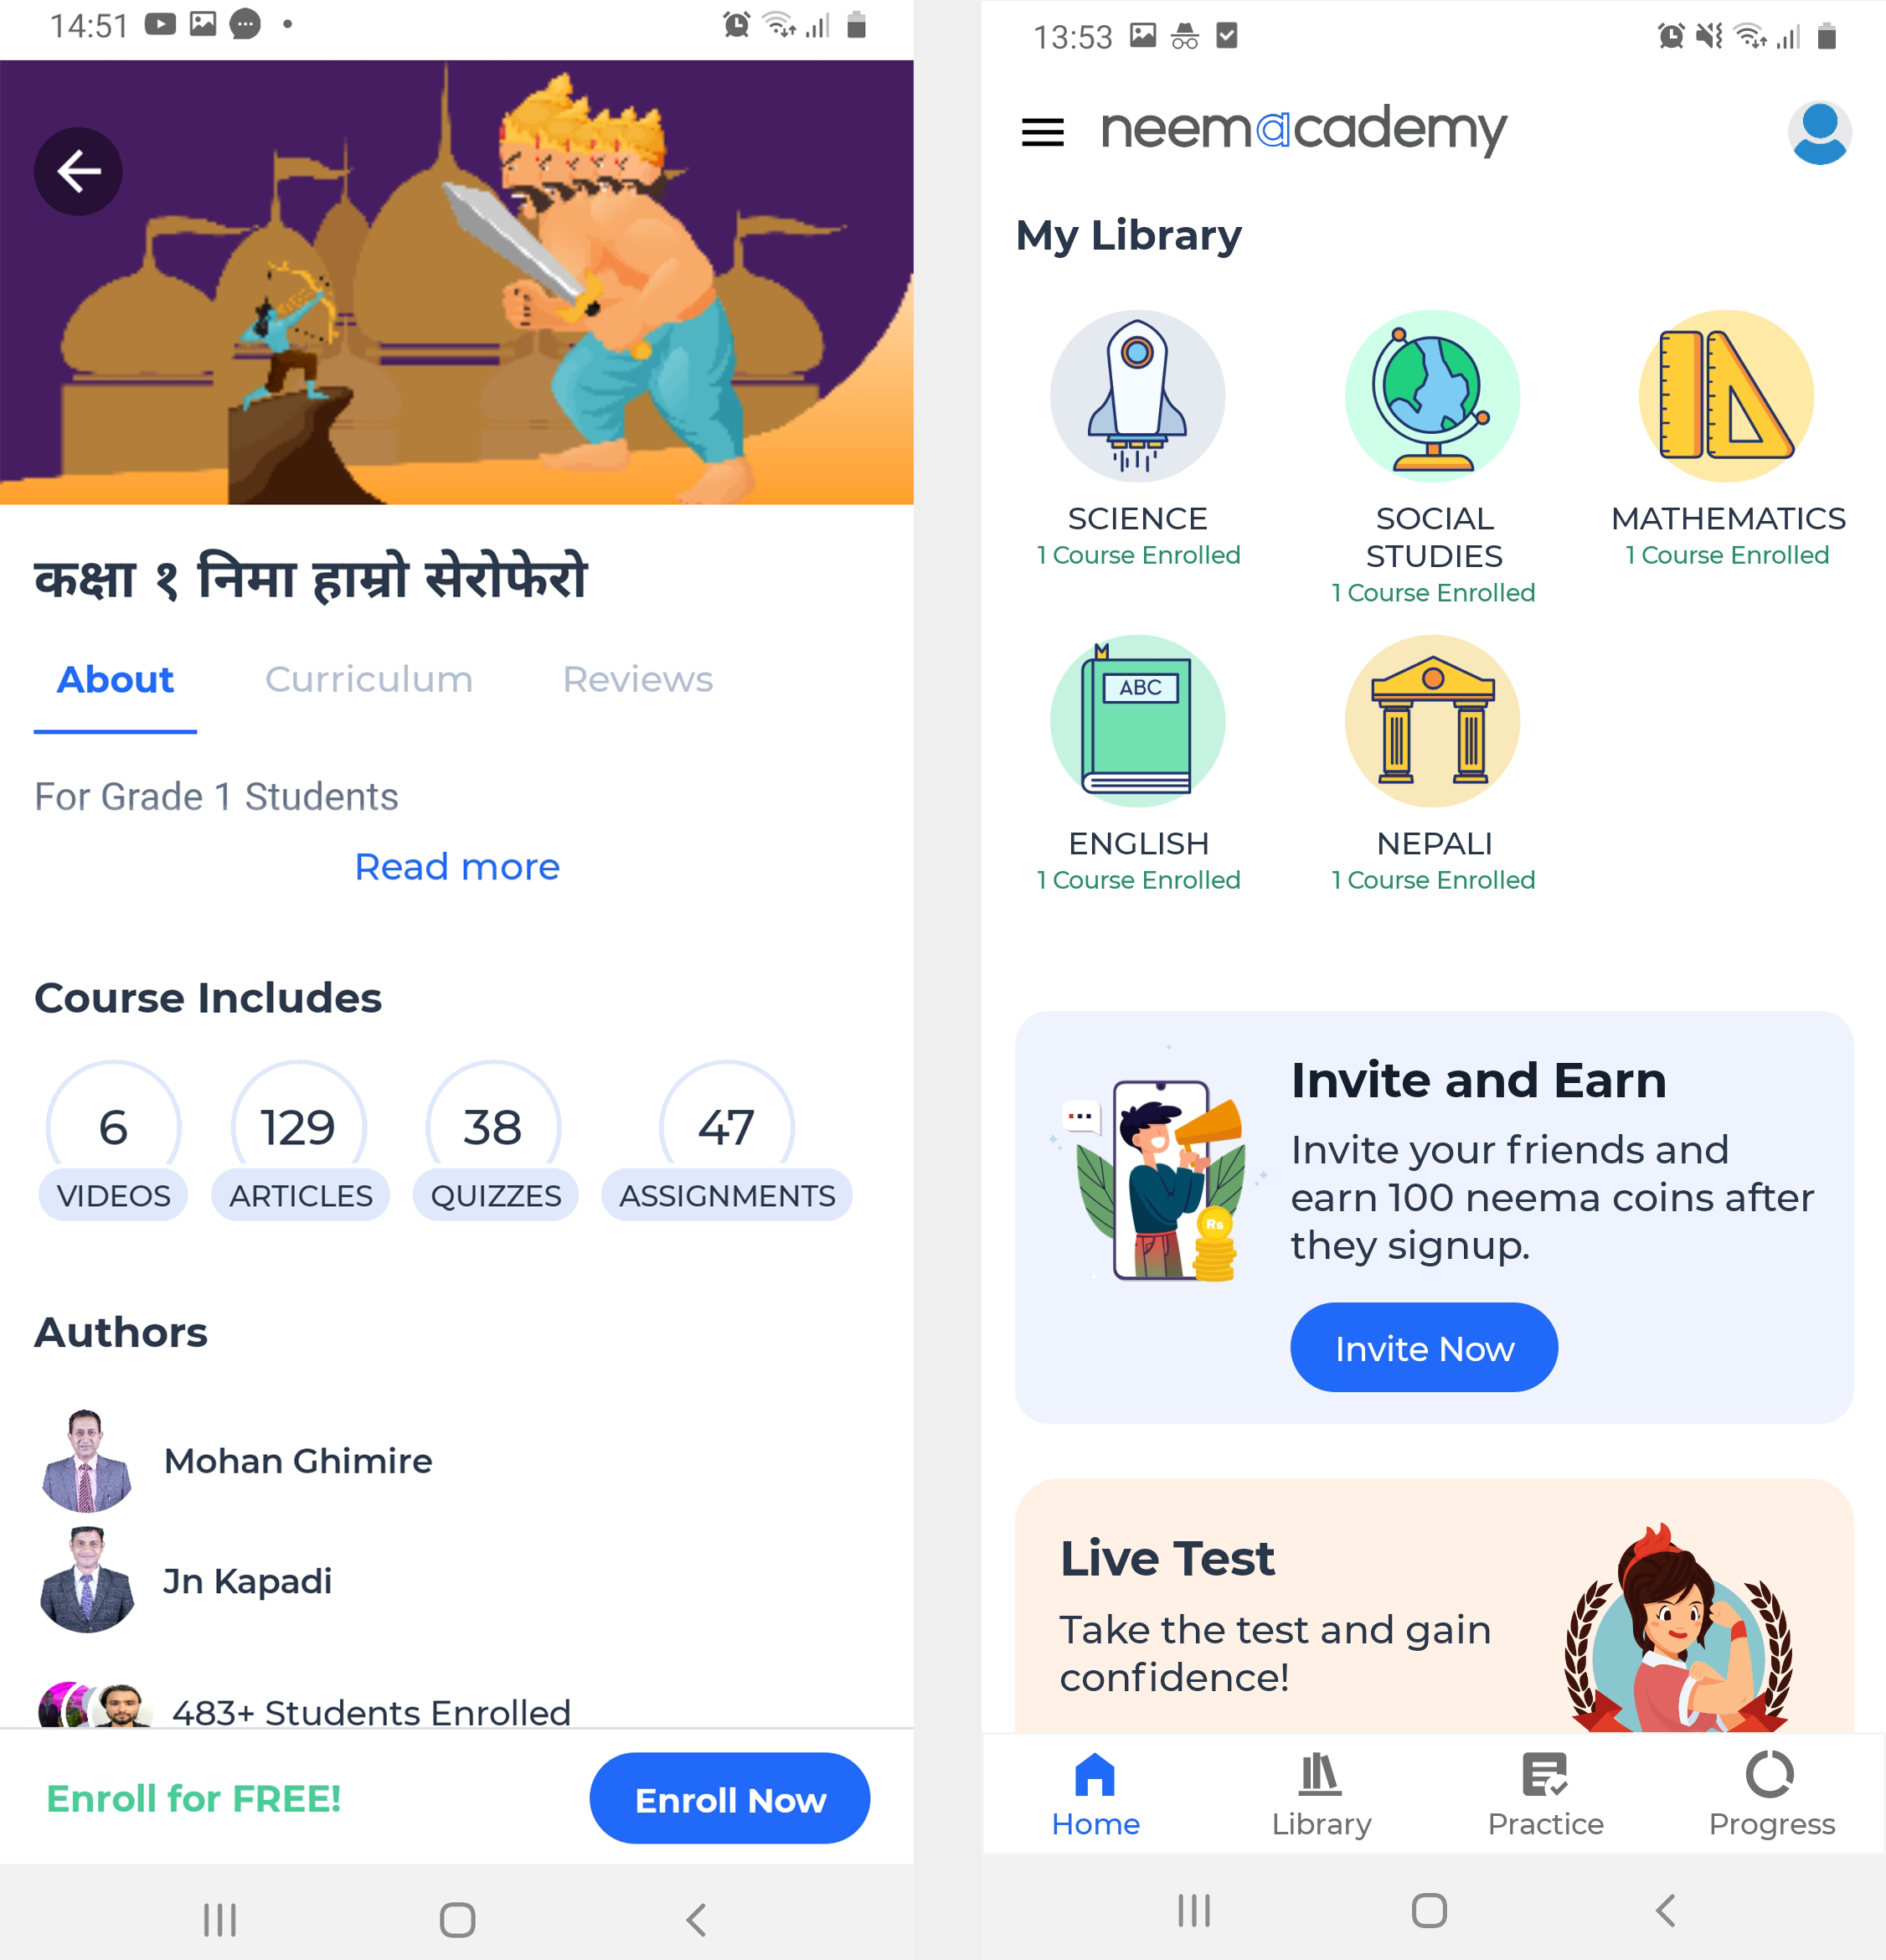 Neemacademy App - Course Curriculum and My Library